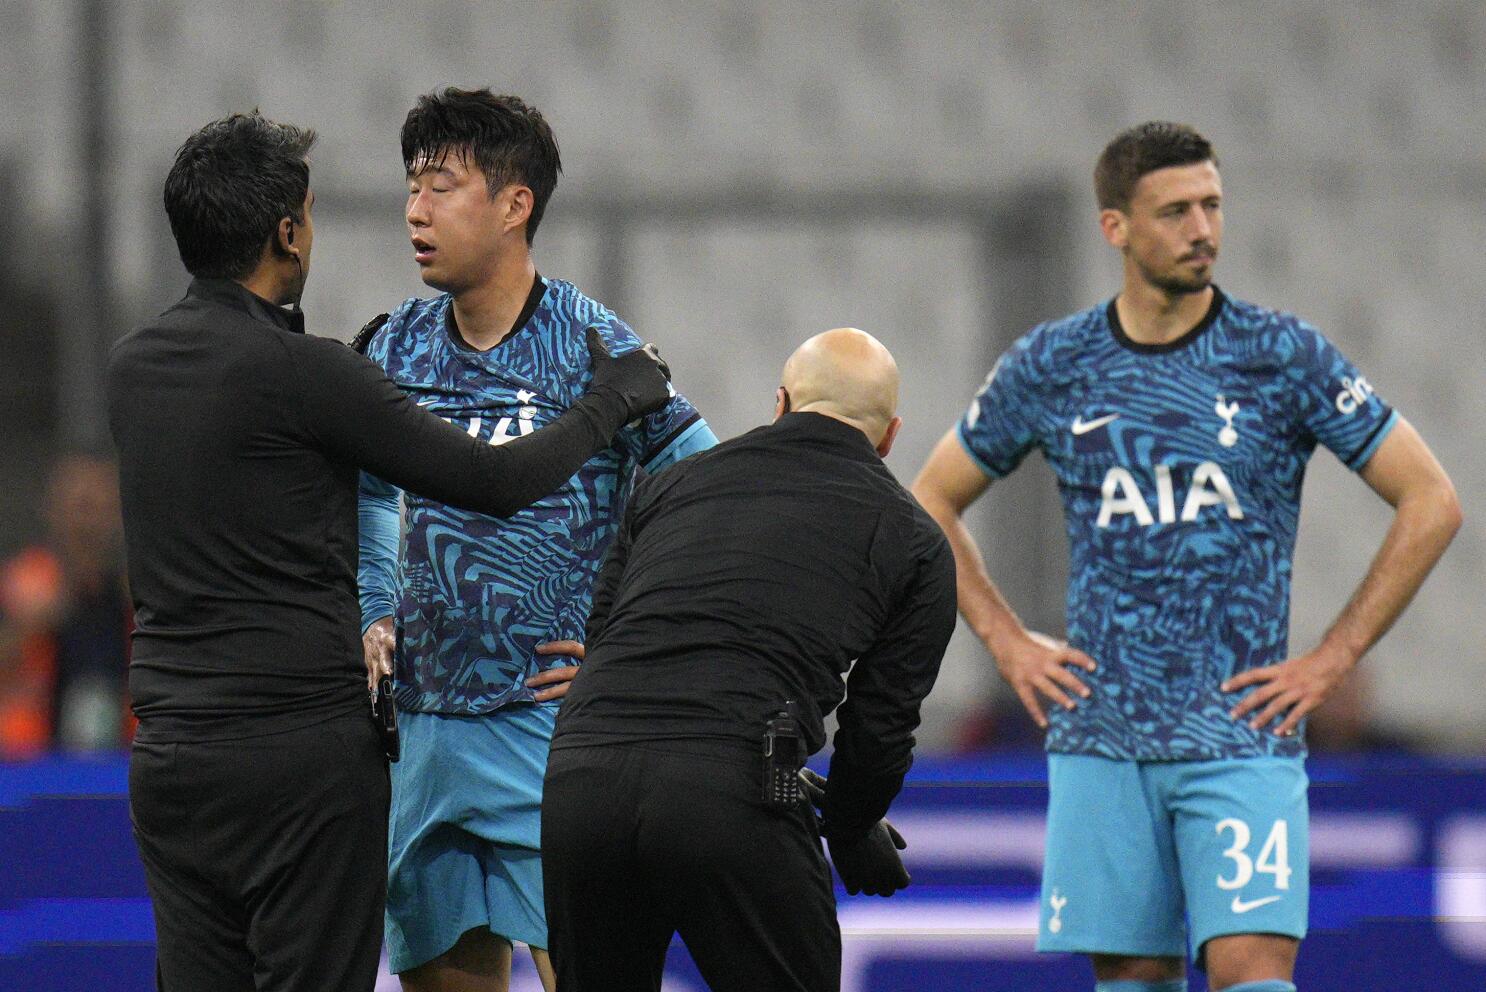 Why South Korea team captain Son Heung-min is wearing a mask at the World  Cup